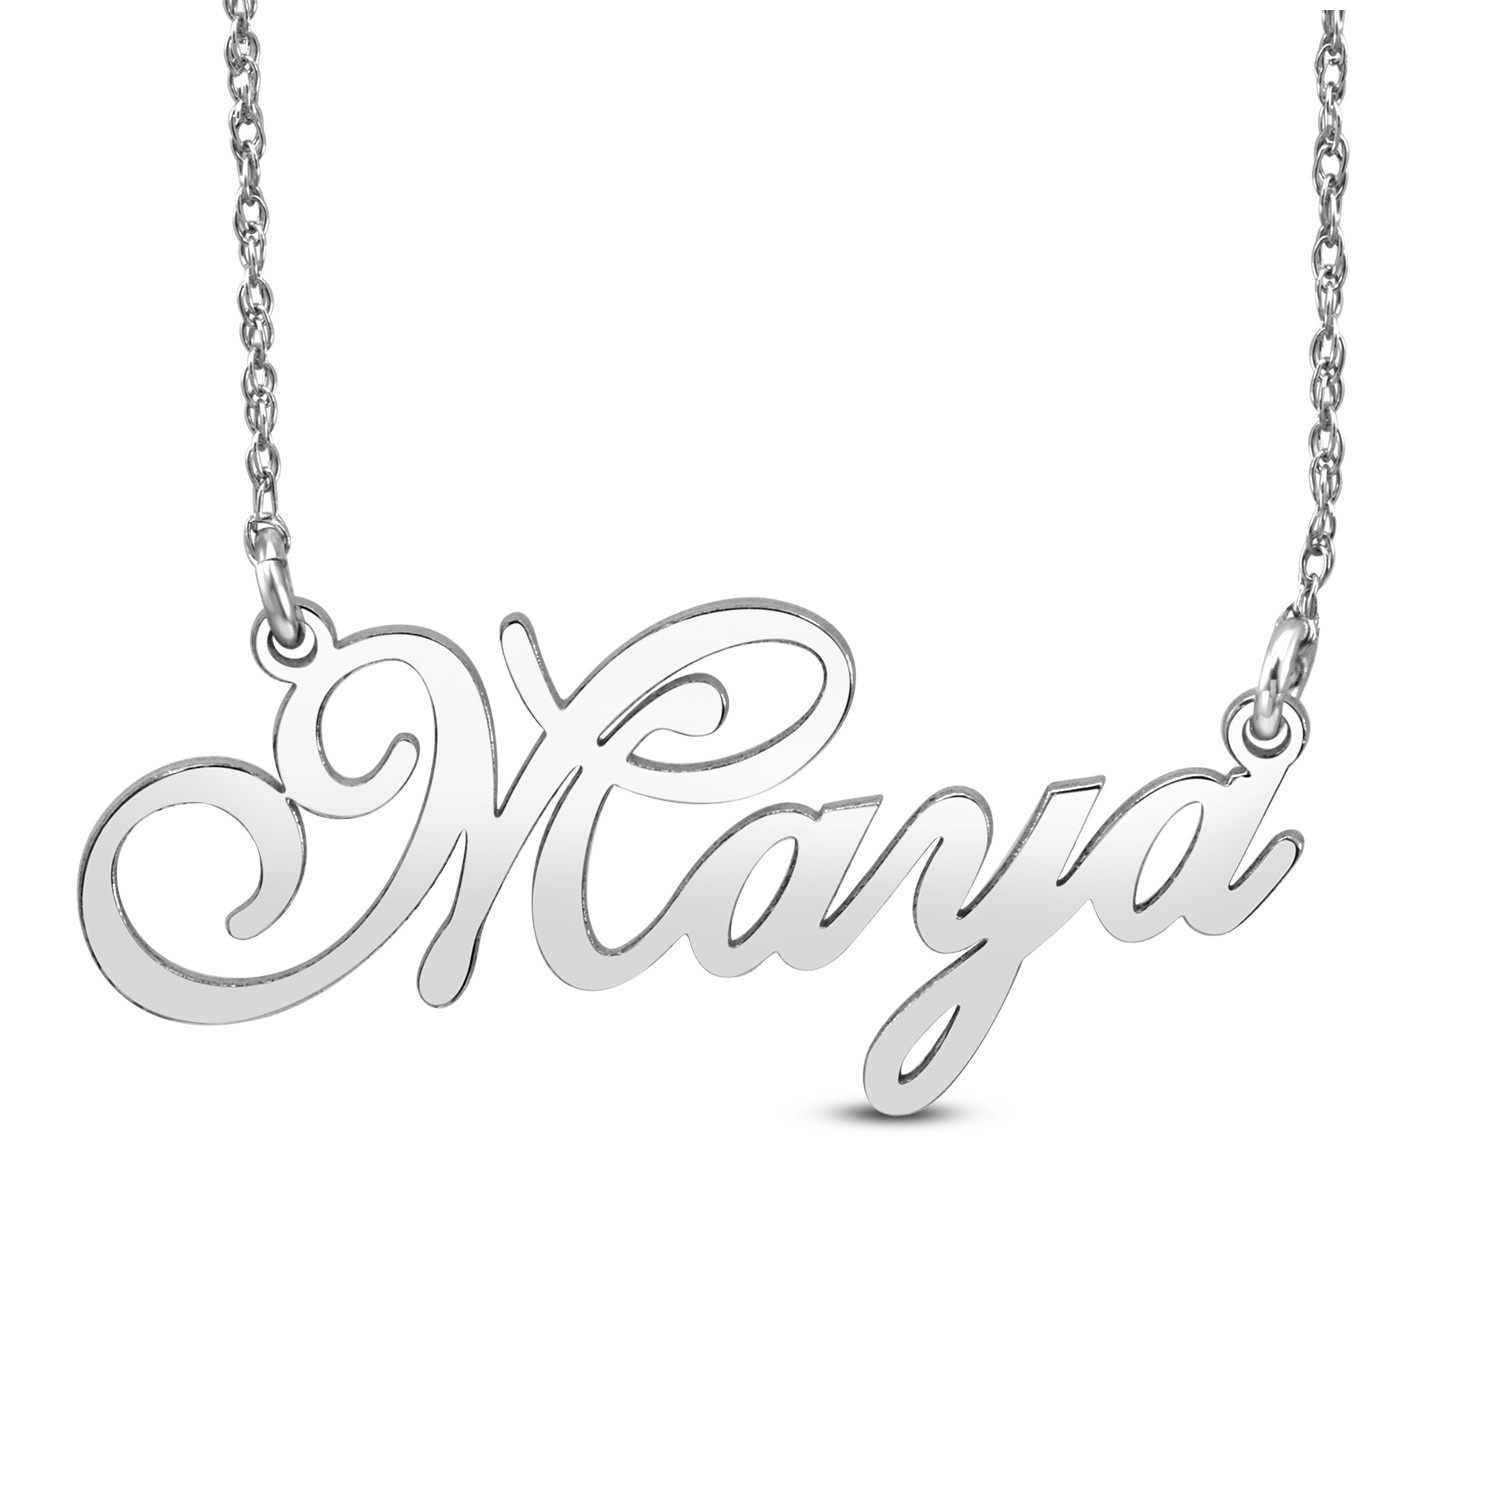 HI Polish Name Pers Necklace - 9 letter max 1 Uppercase letter (Example: Stephanie S=11.99mm x 2.02" e=5.31mm)